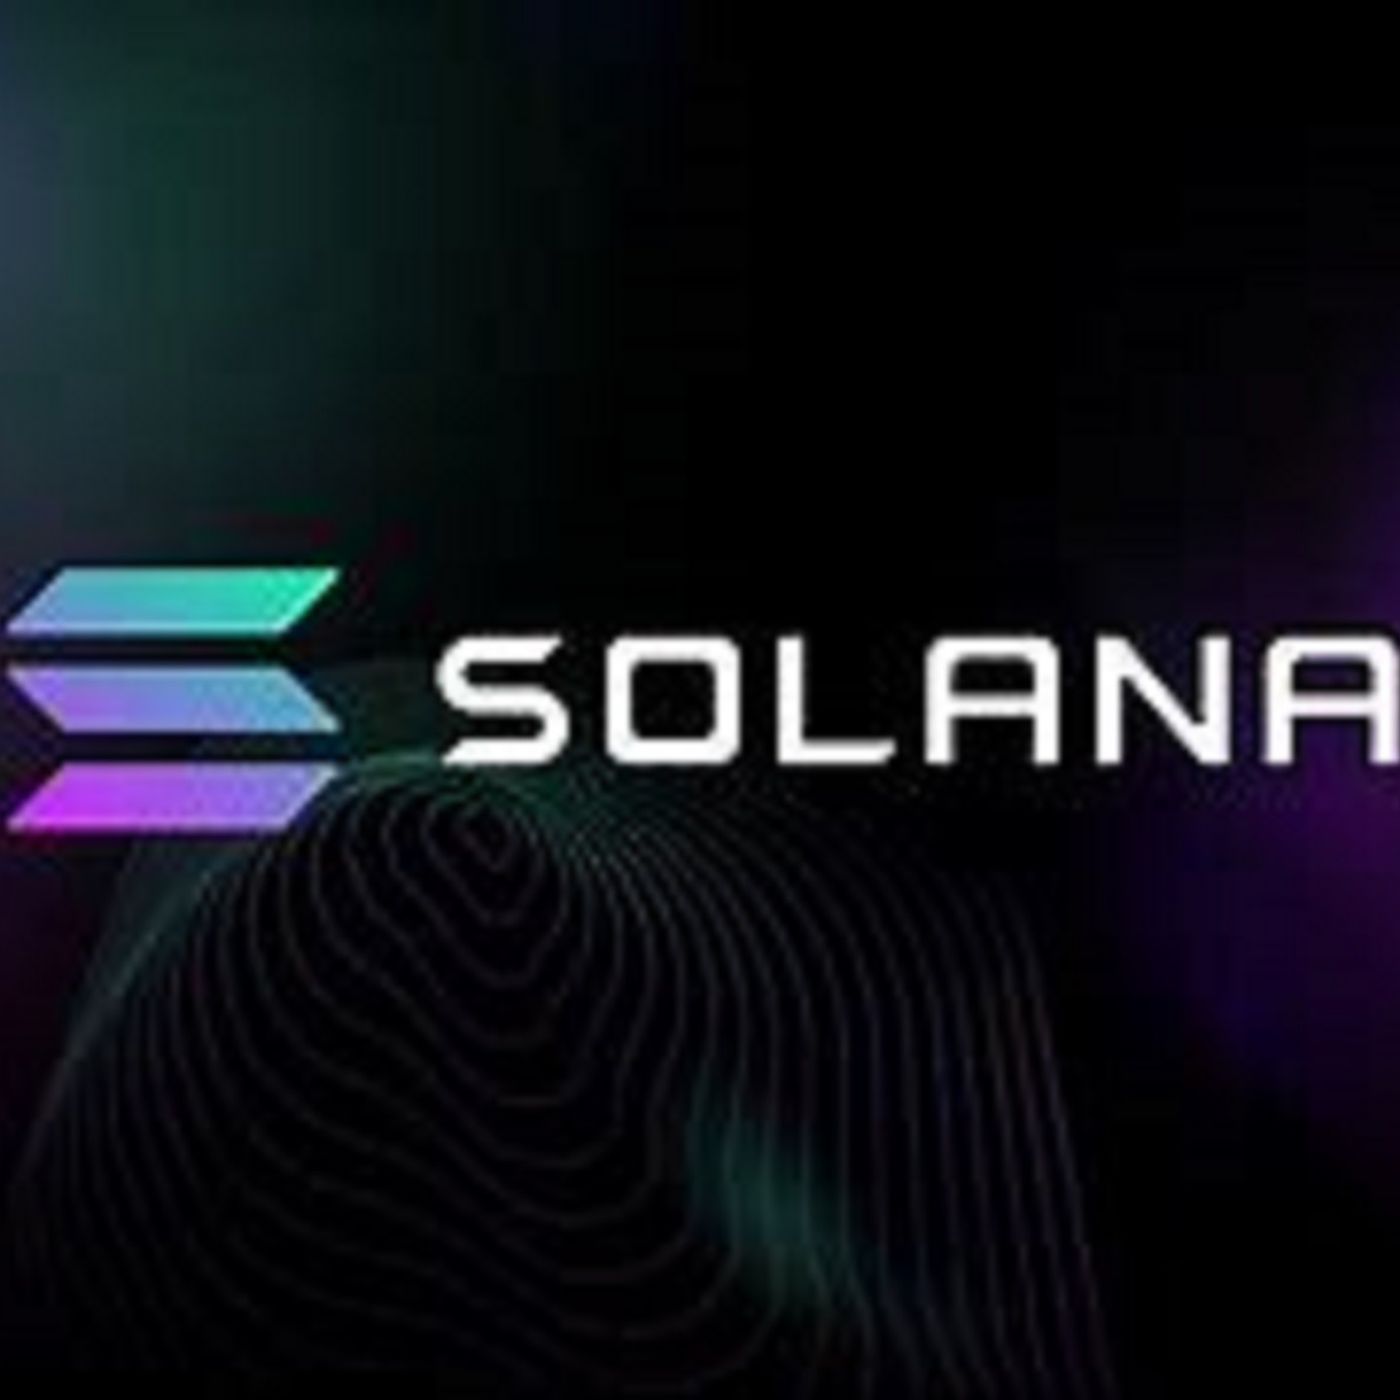 SOL Price Surges To $115 – Why Solana Could Rally Another 10%